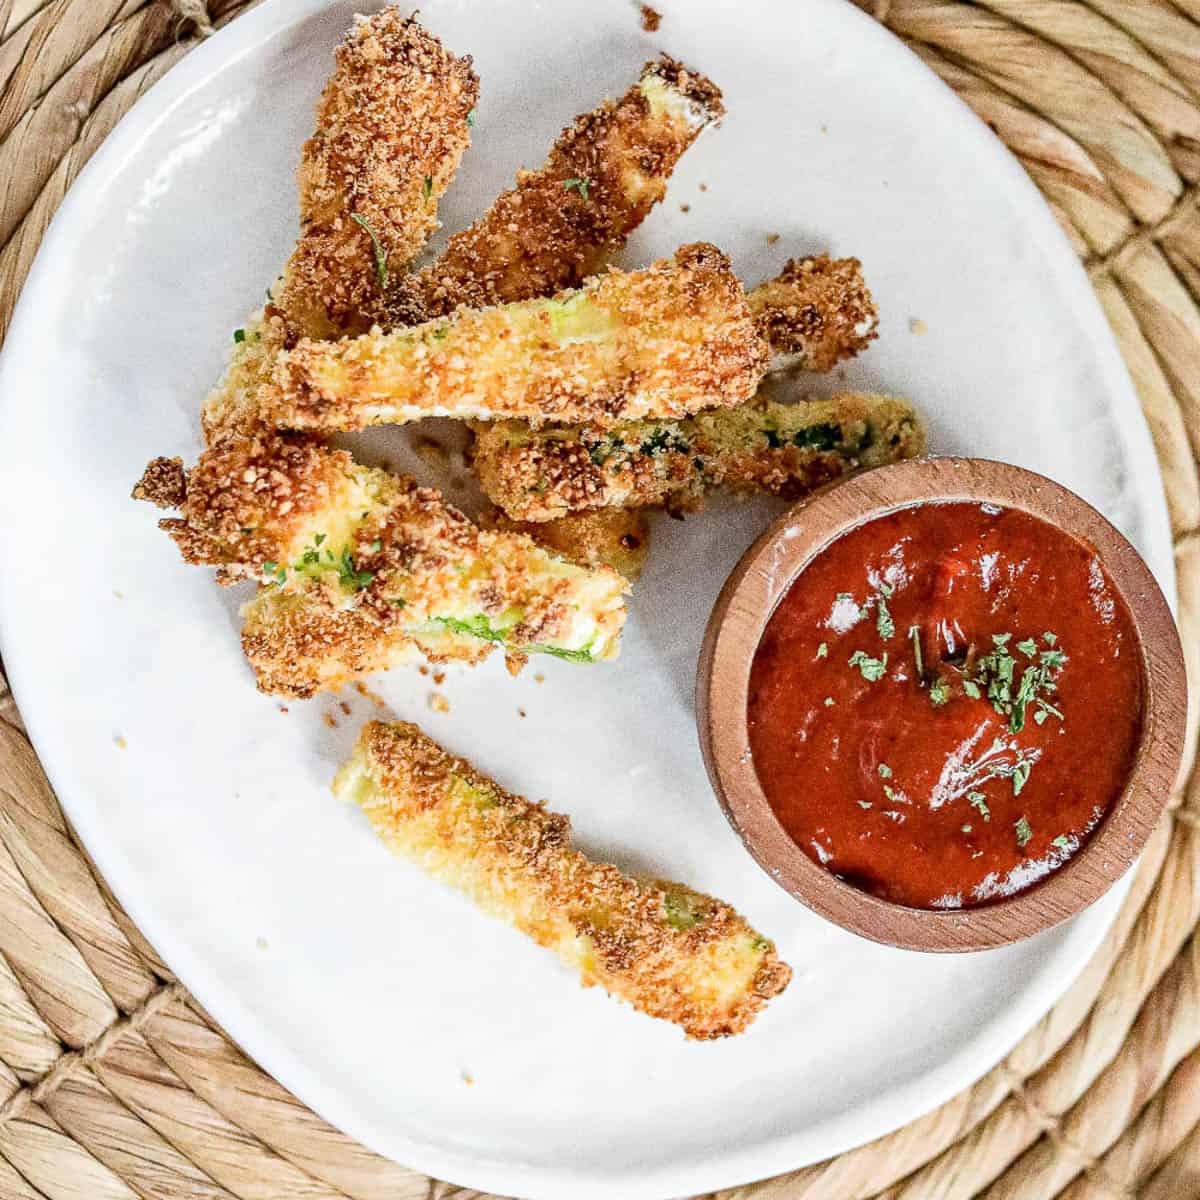 Overhead shot of a plate of Air Fryer Zucchini Fries with a bowl of spicy ketchup for dipping.